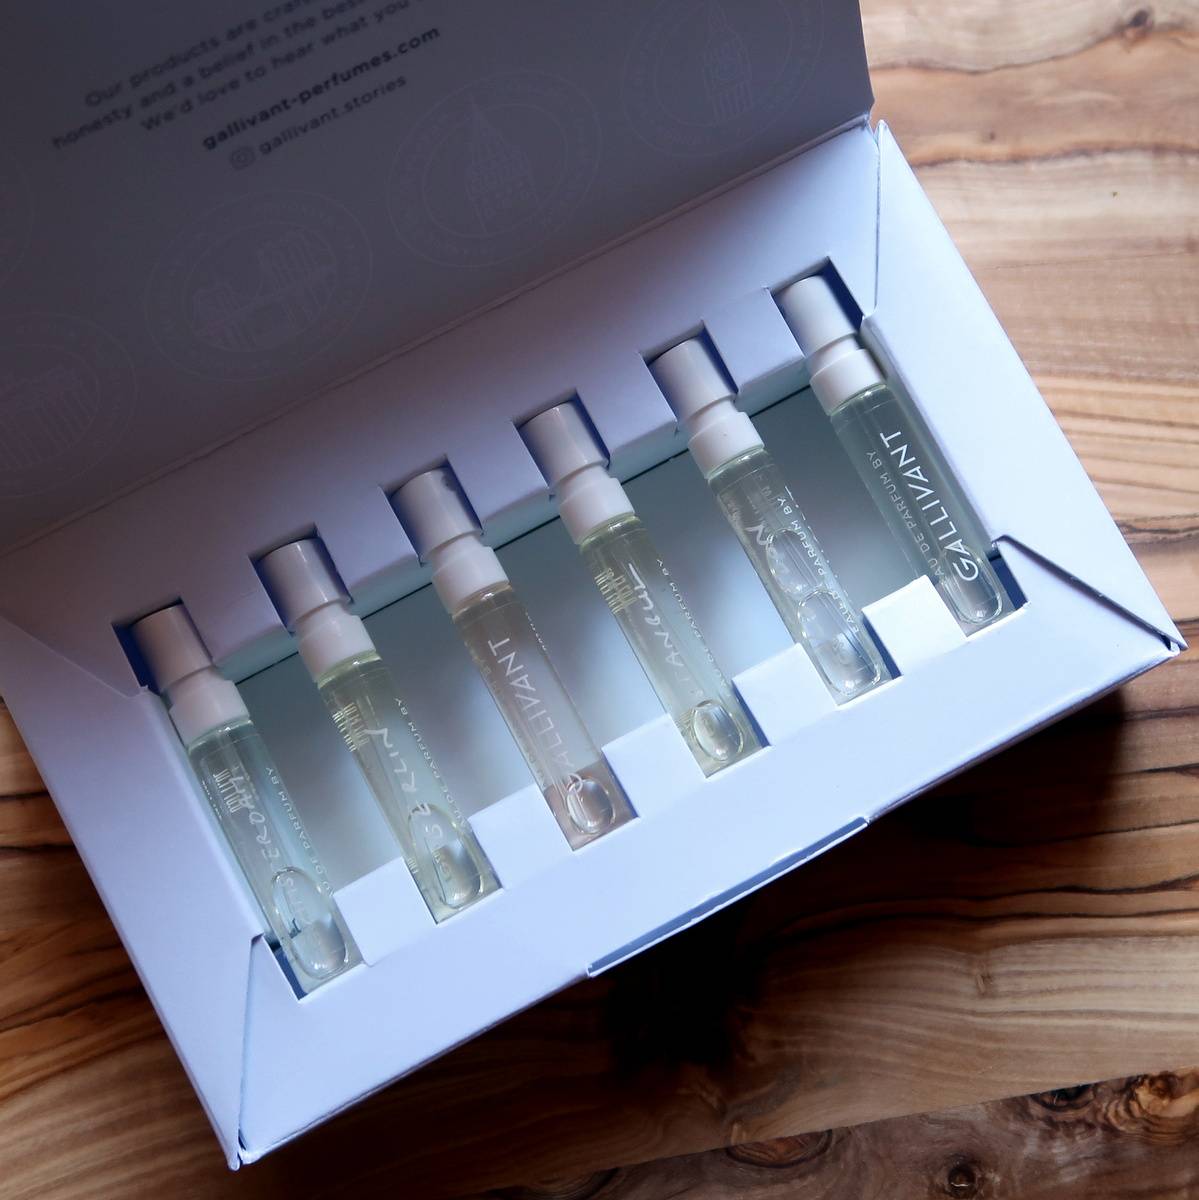 Fragrance discovery sets - Gallivant